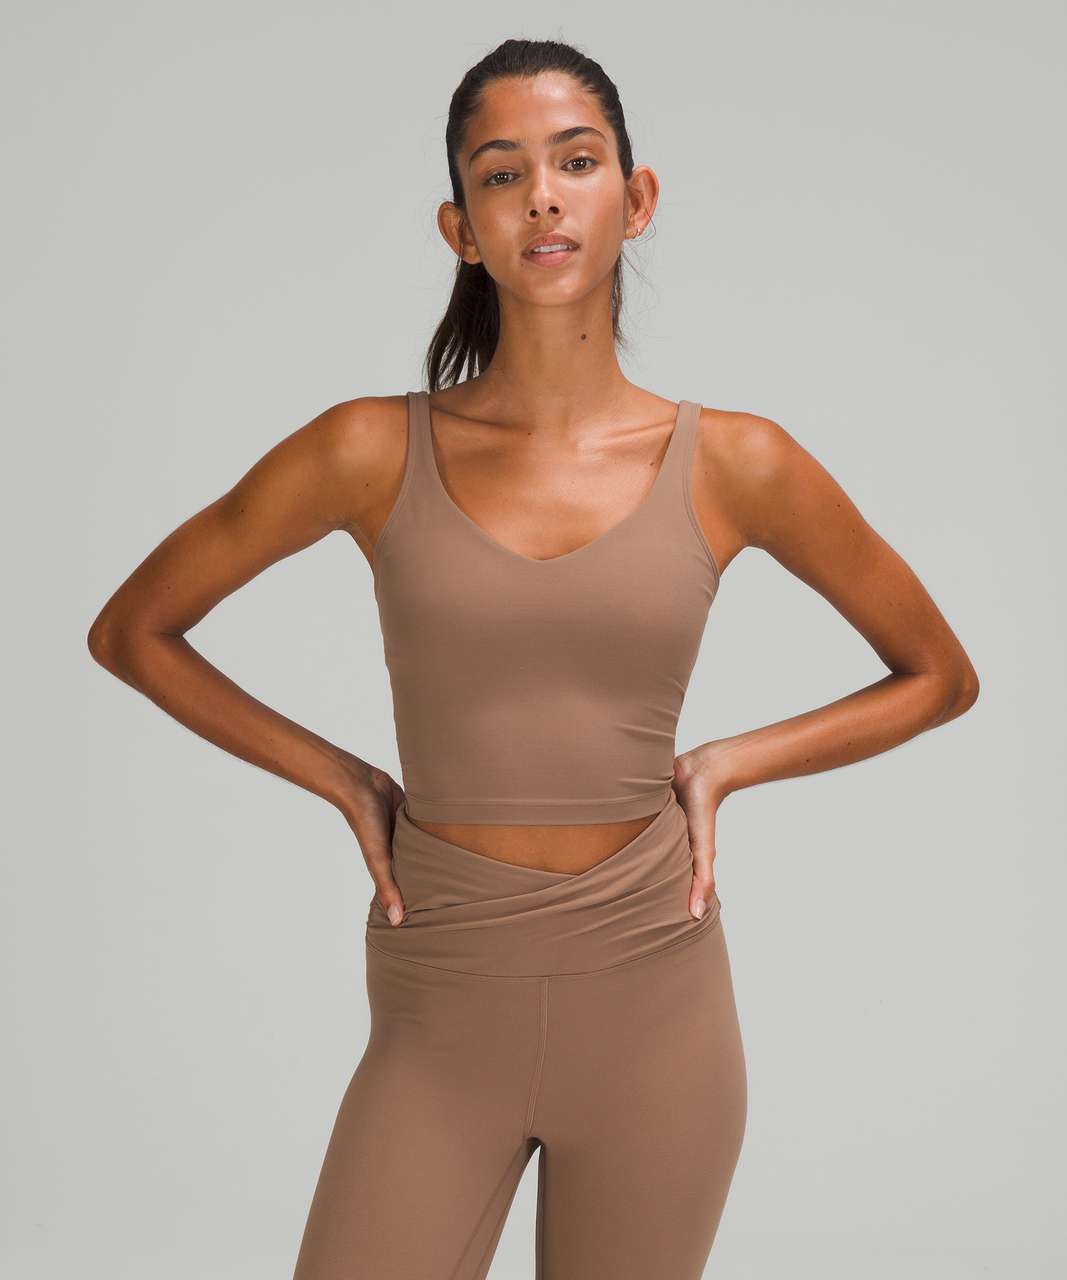 Lululemon Align Tank Cacao 4  Clothes design, Outfit inspo, Fashion tips